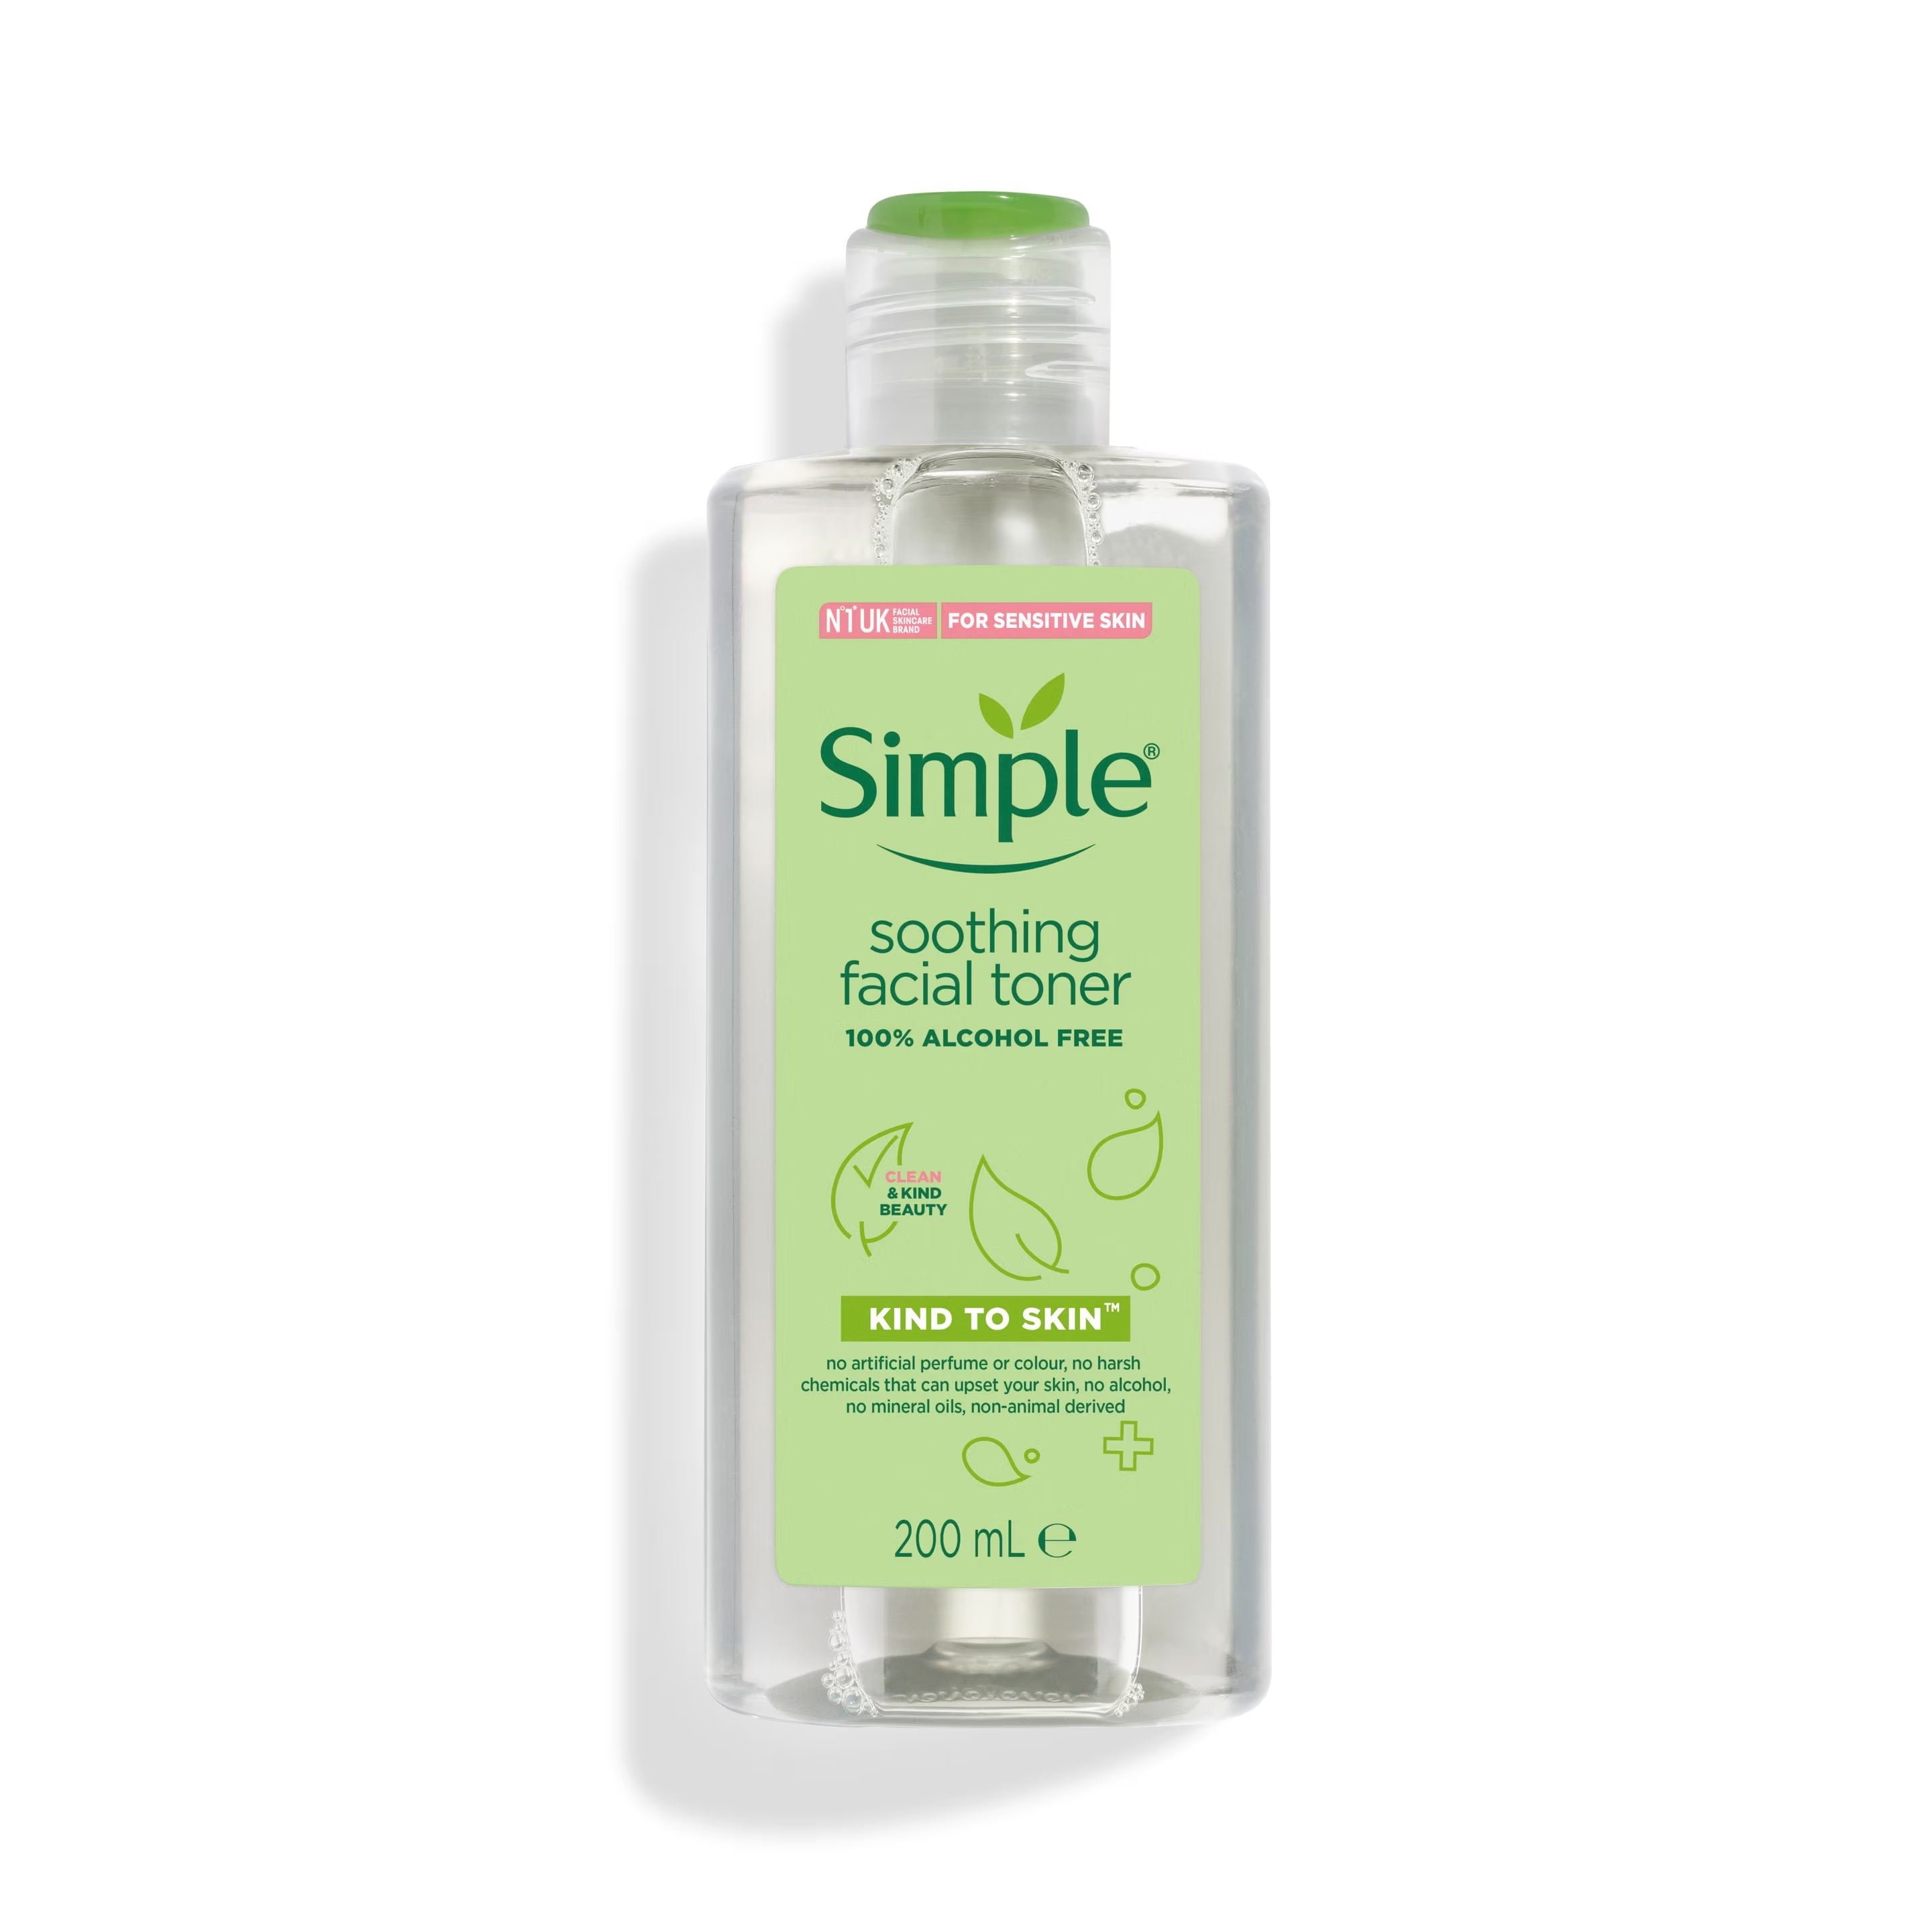 /simple-kind-to-skin-soothing-facial-toner